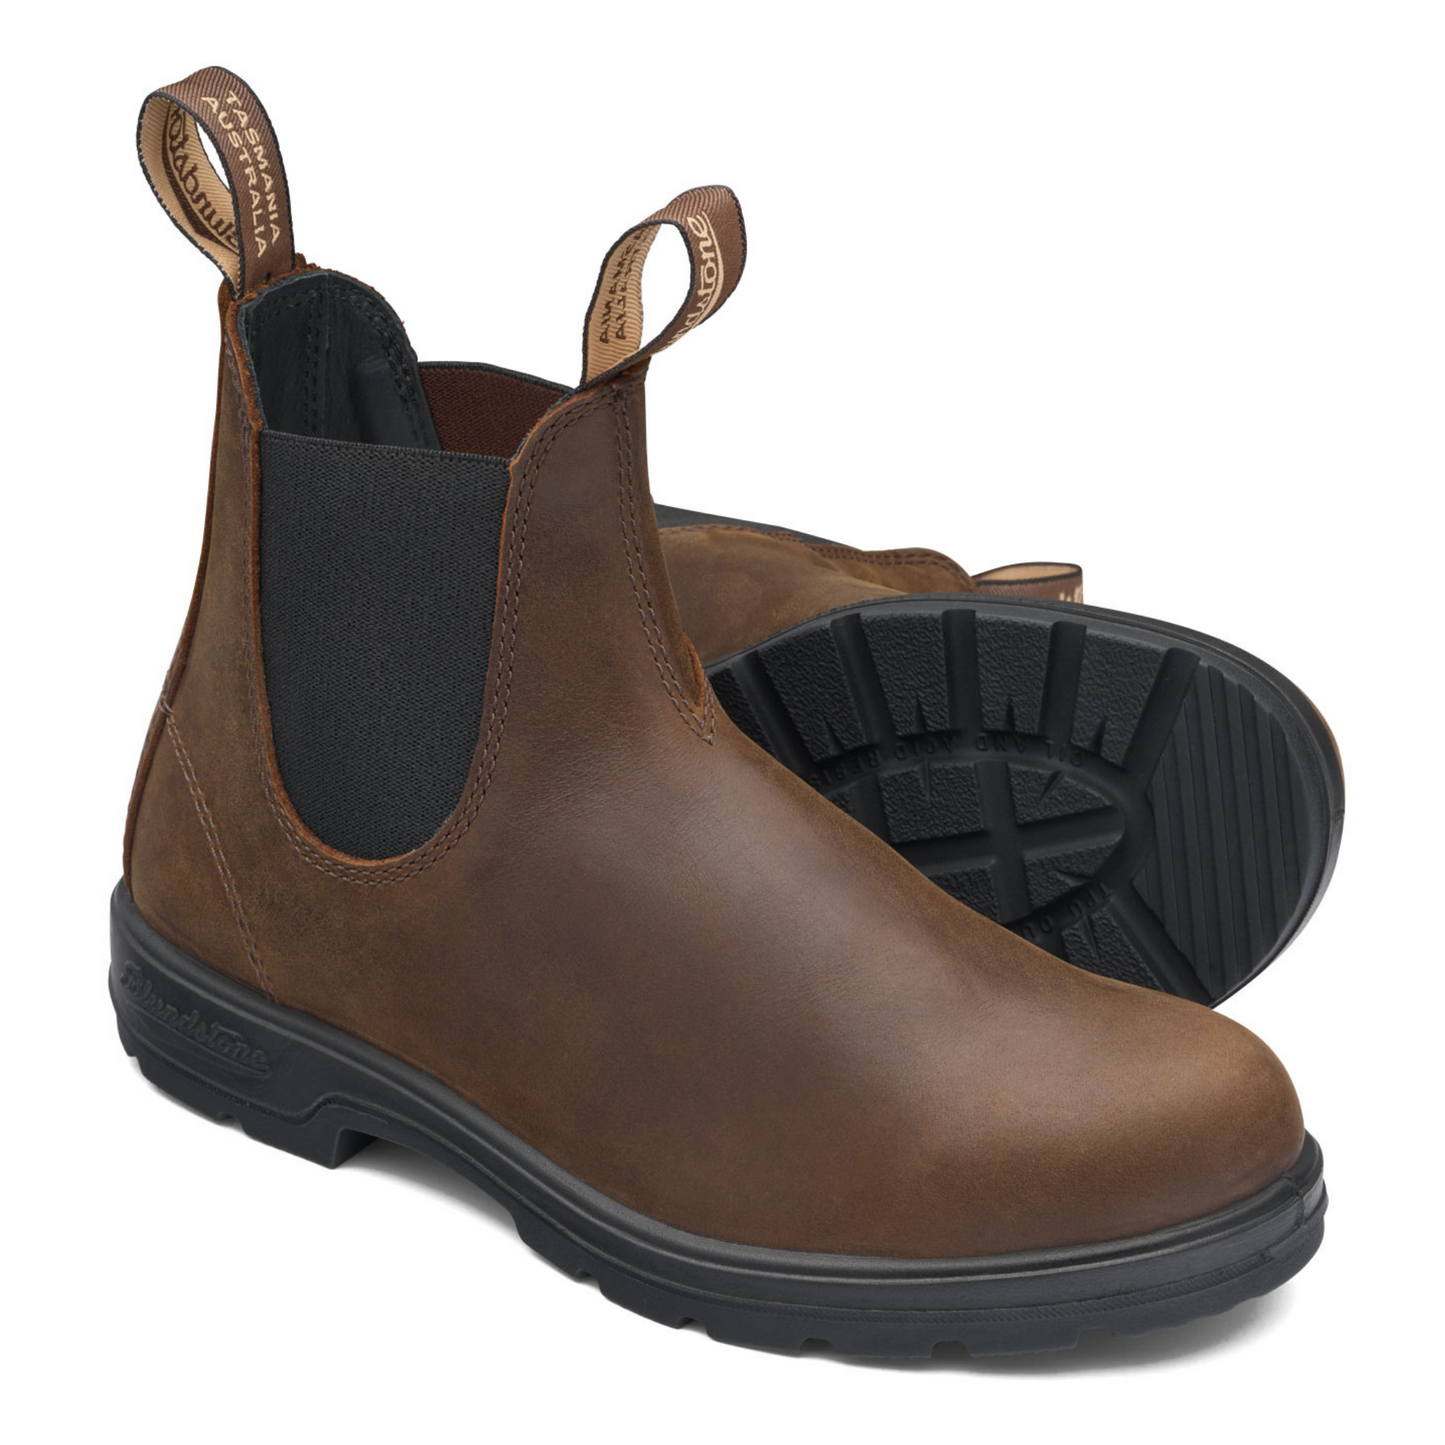 A pair of unisex, brown leather boots with black leather interior lining. 